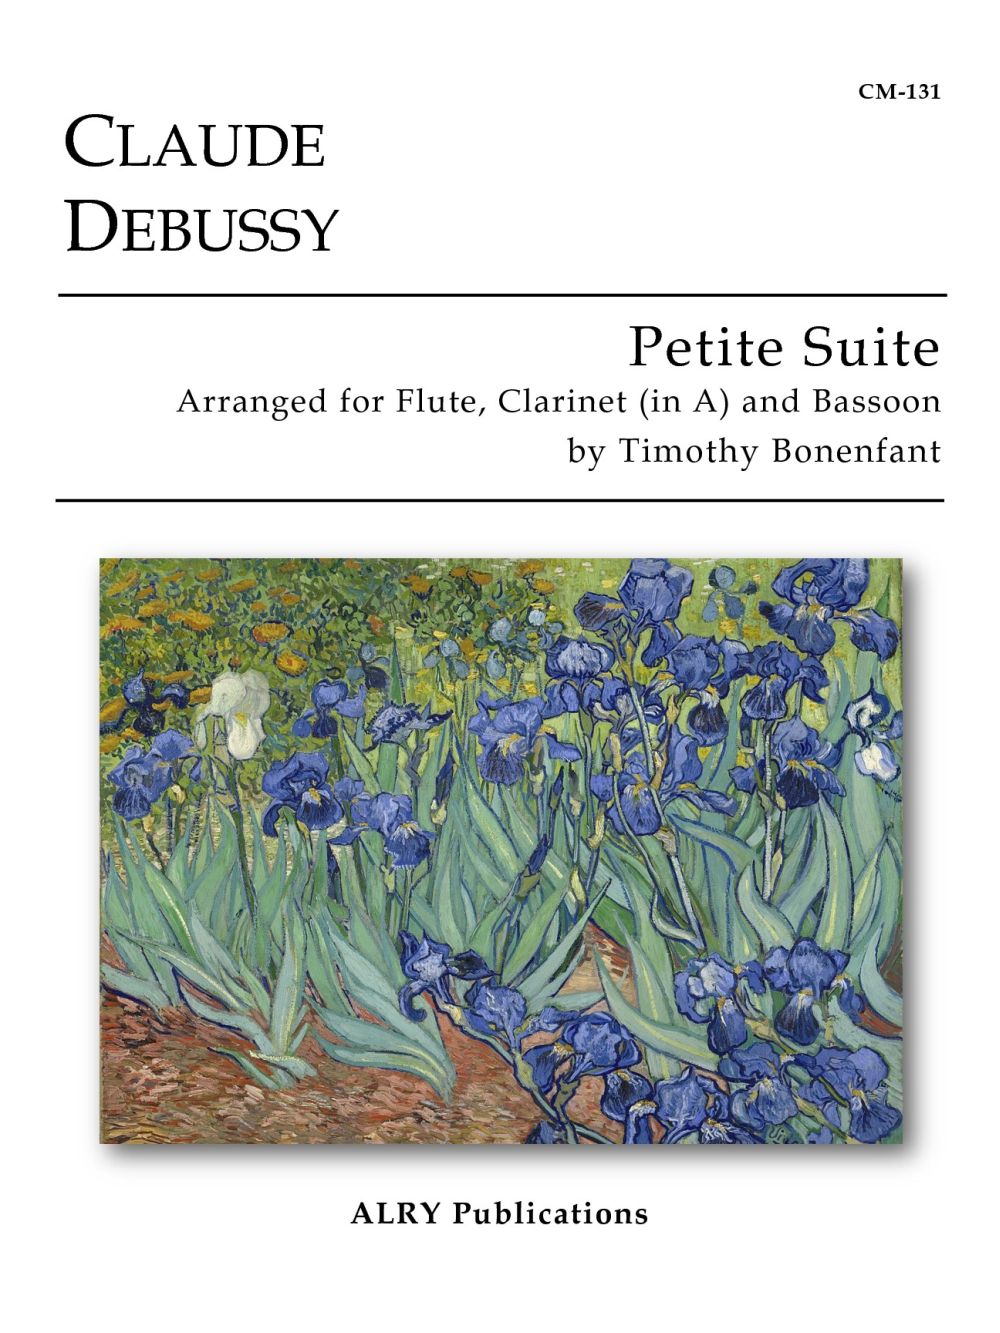 Petite Suite For Flute, Clarinet And Bassoon